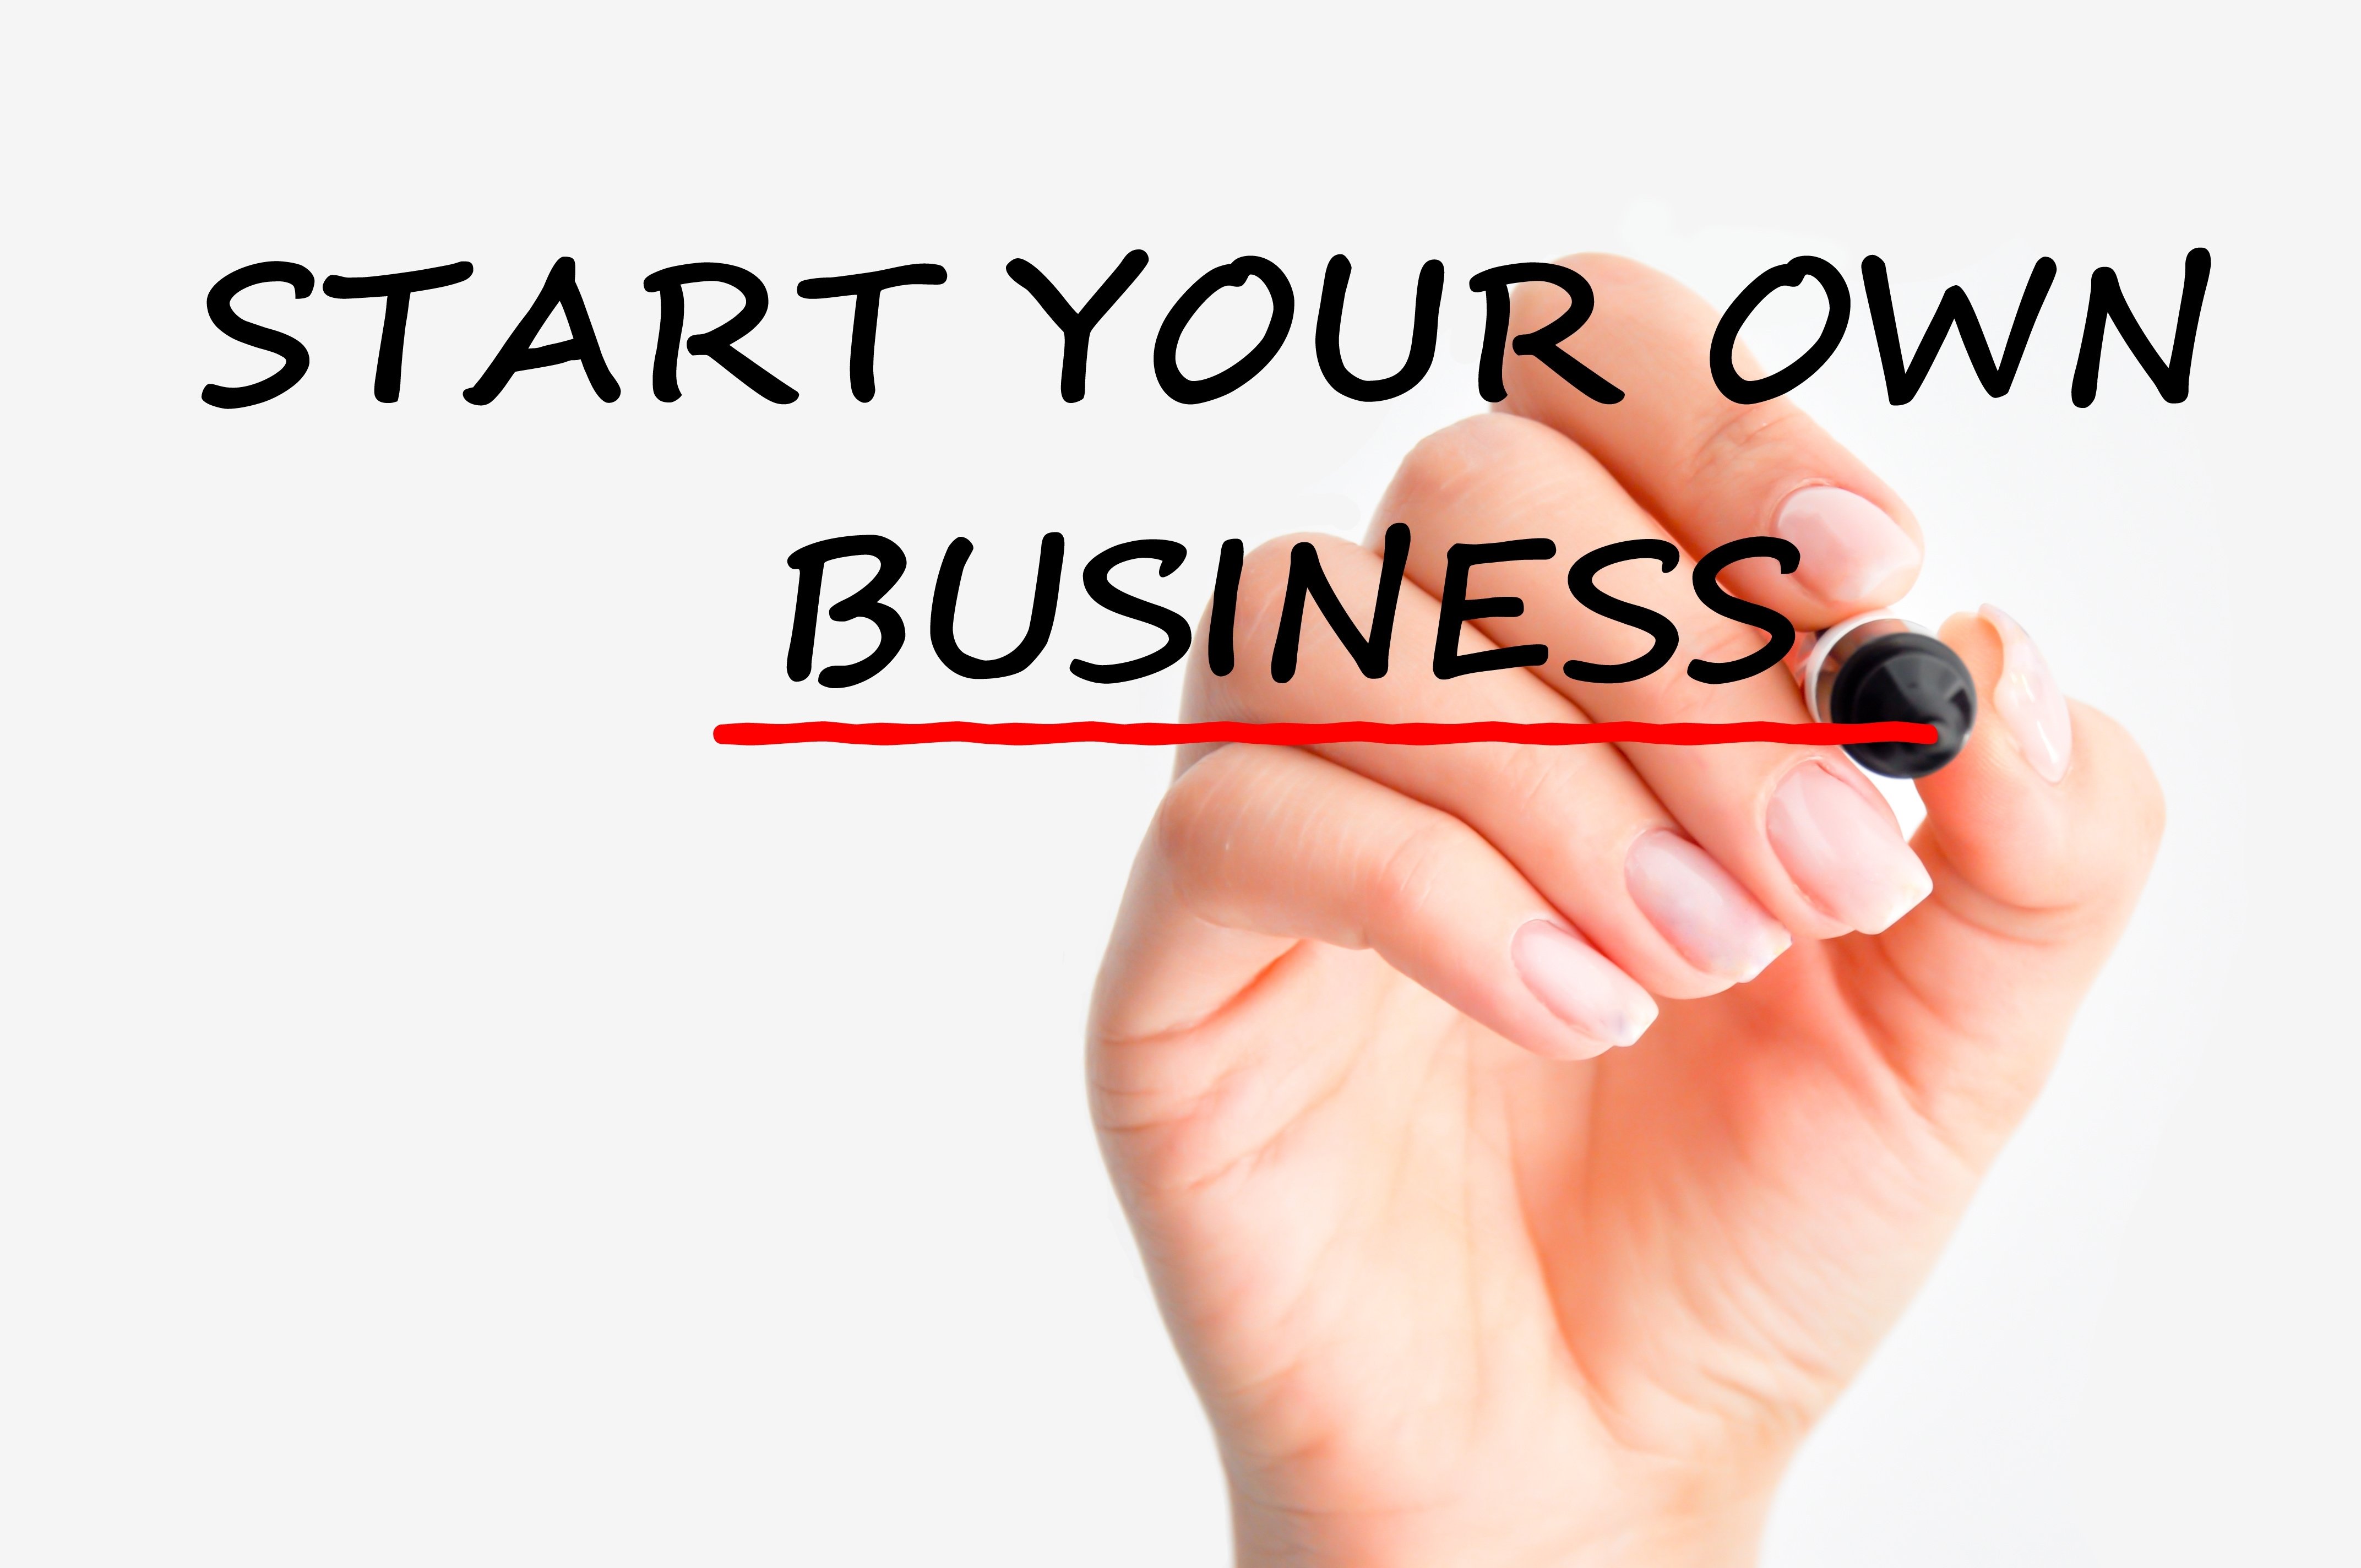 10 Awesome Ideas To Start A Business 10 low cost ideas to start your own business start your business 3 2022